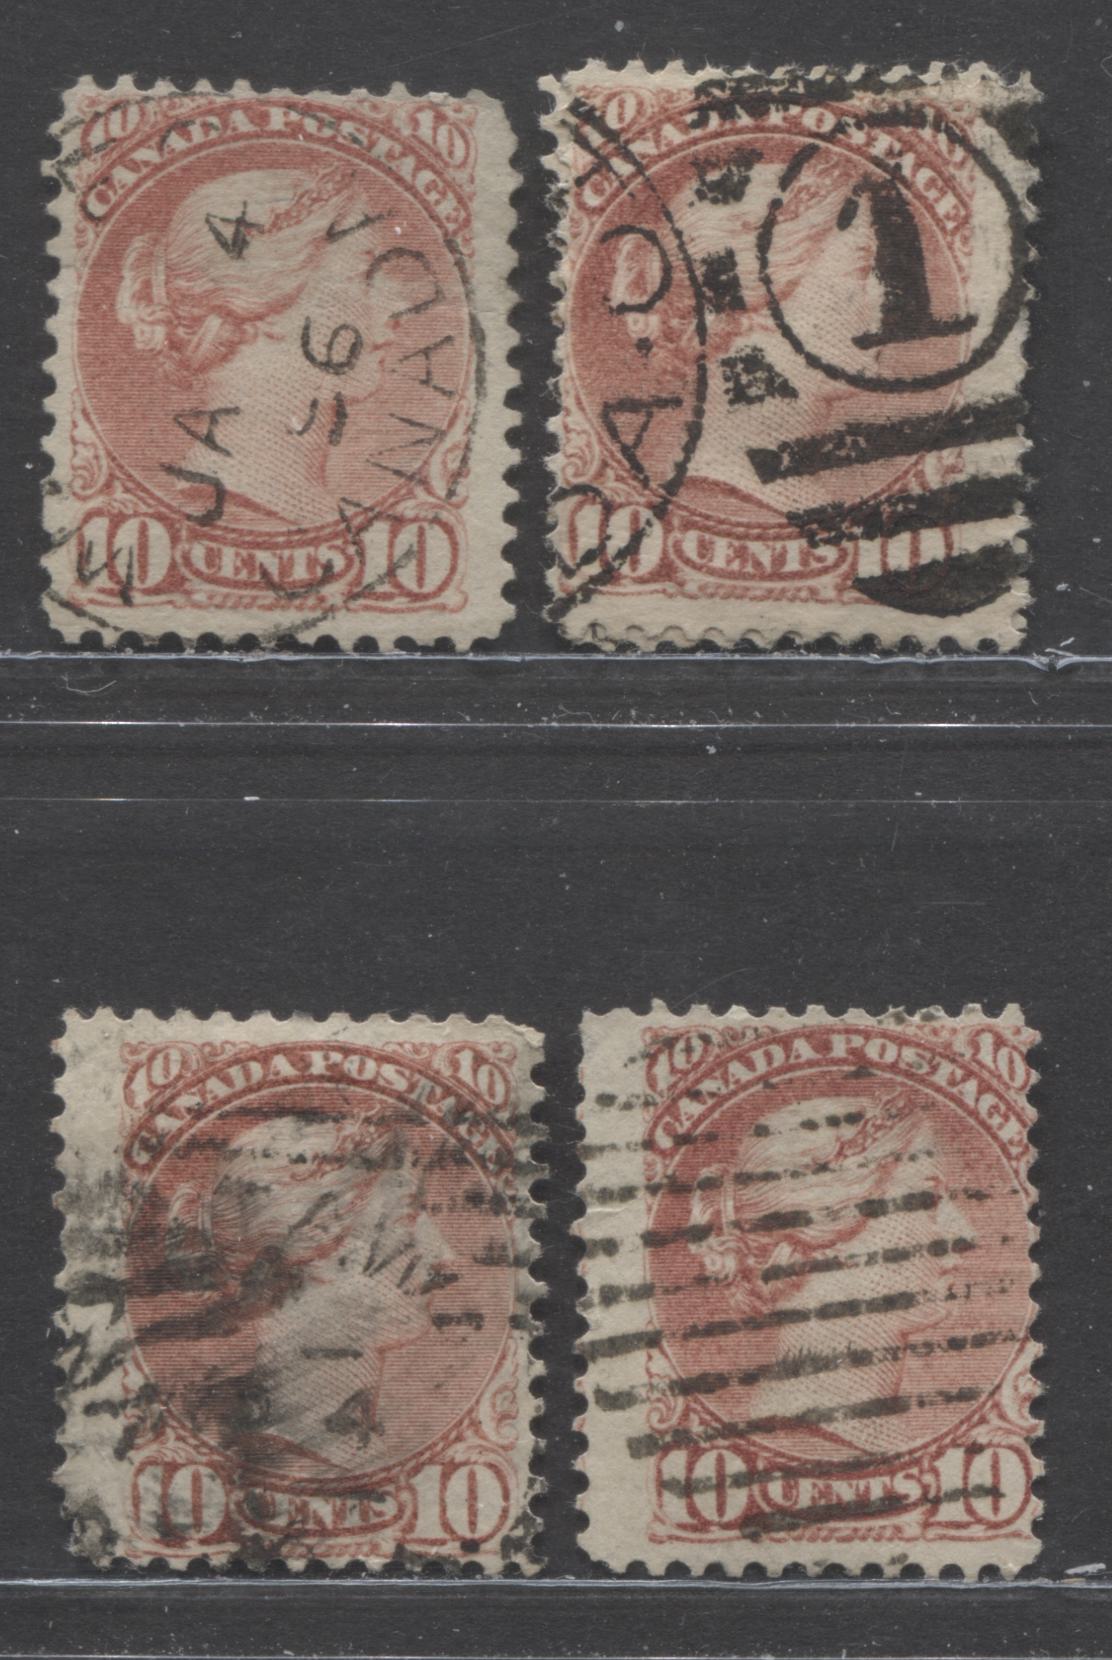 Lot 216 Canada #45a 10c Dull Rose Queen Victoria, 1870-1897 Small Queen Issue, 5 Good To Very Fine Examples Of The 2nd Ottawa Printings On Different Papers & Cancels, Severe Crease On One Stamp